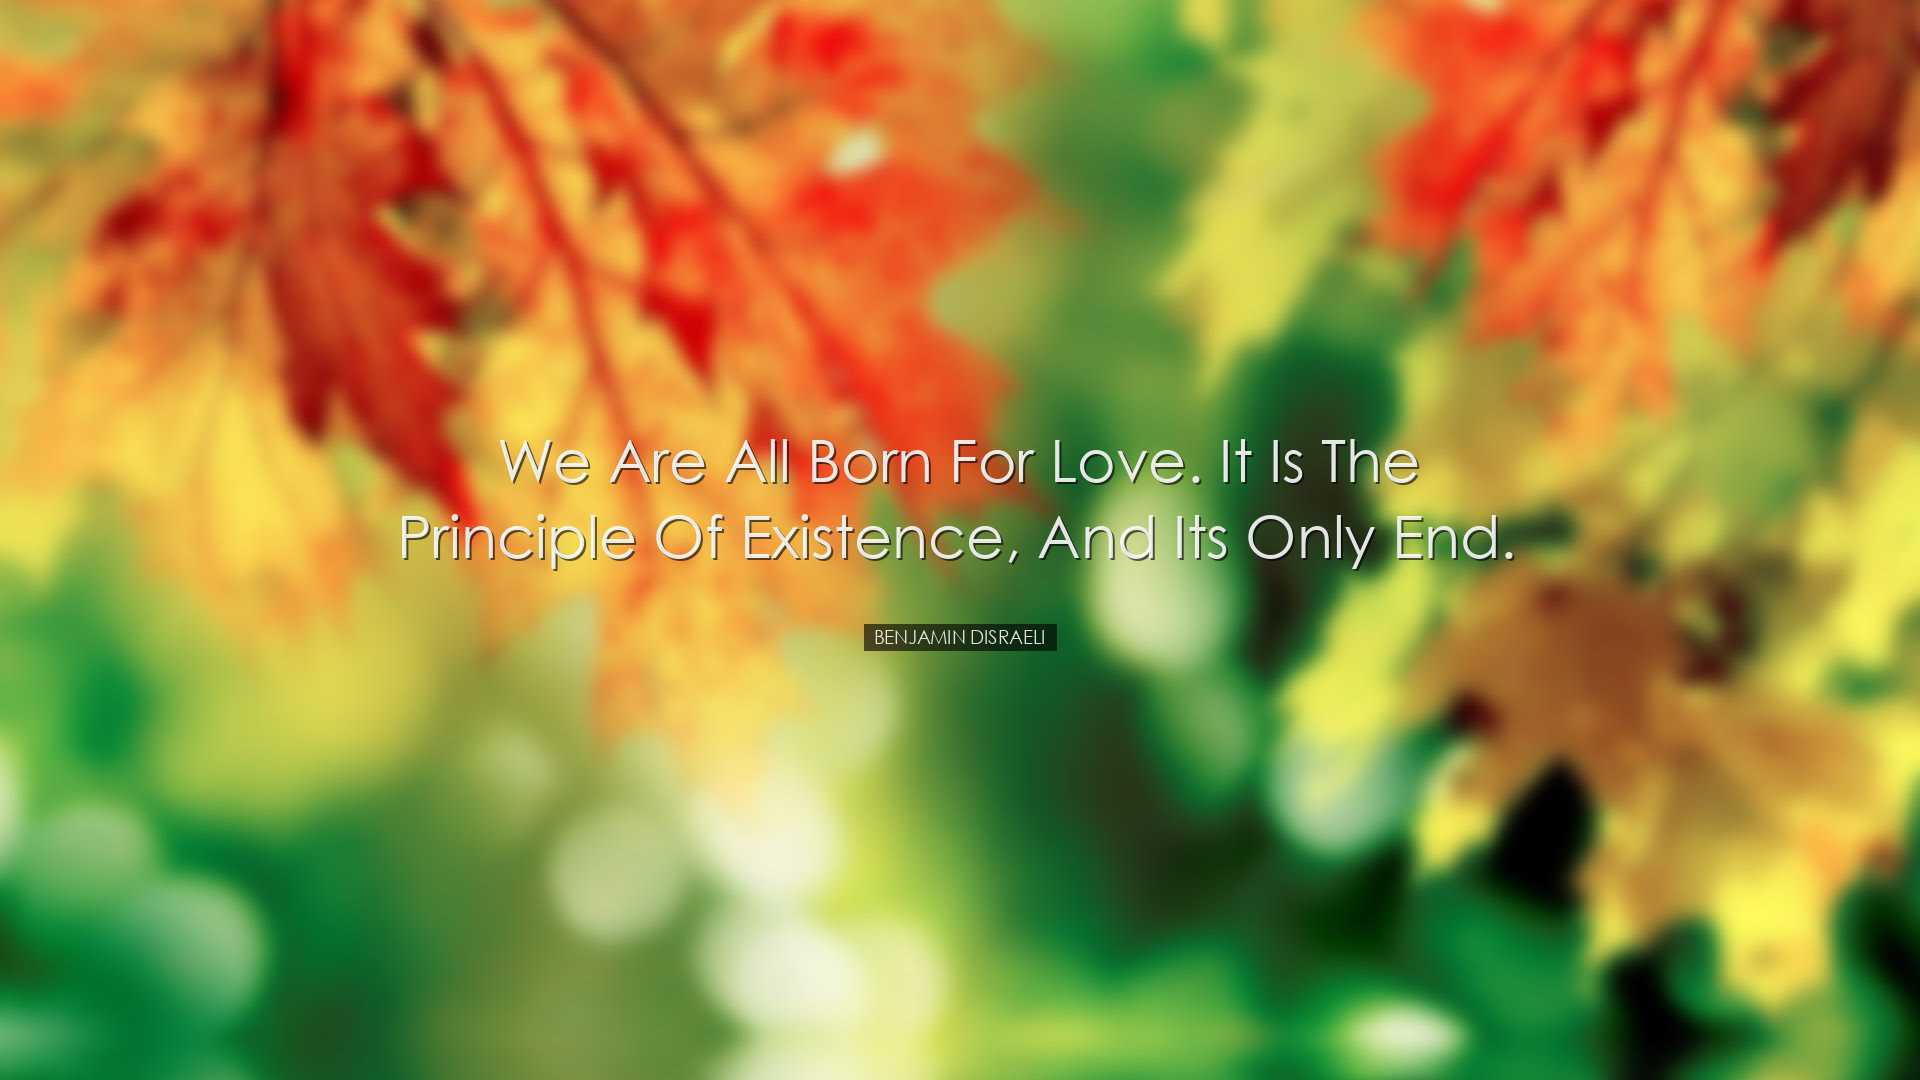 We are all born for love. It is the principle of existence, and it